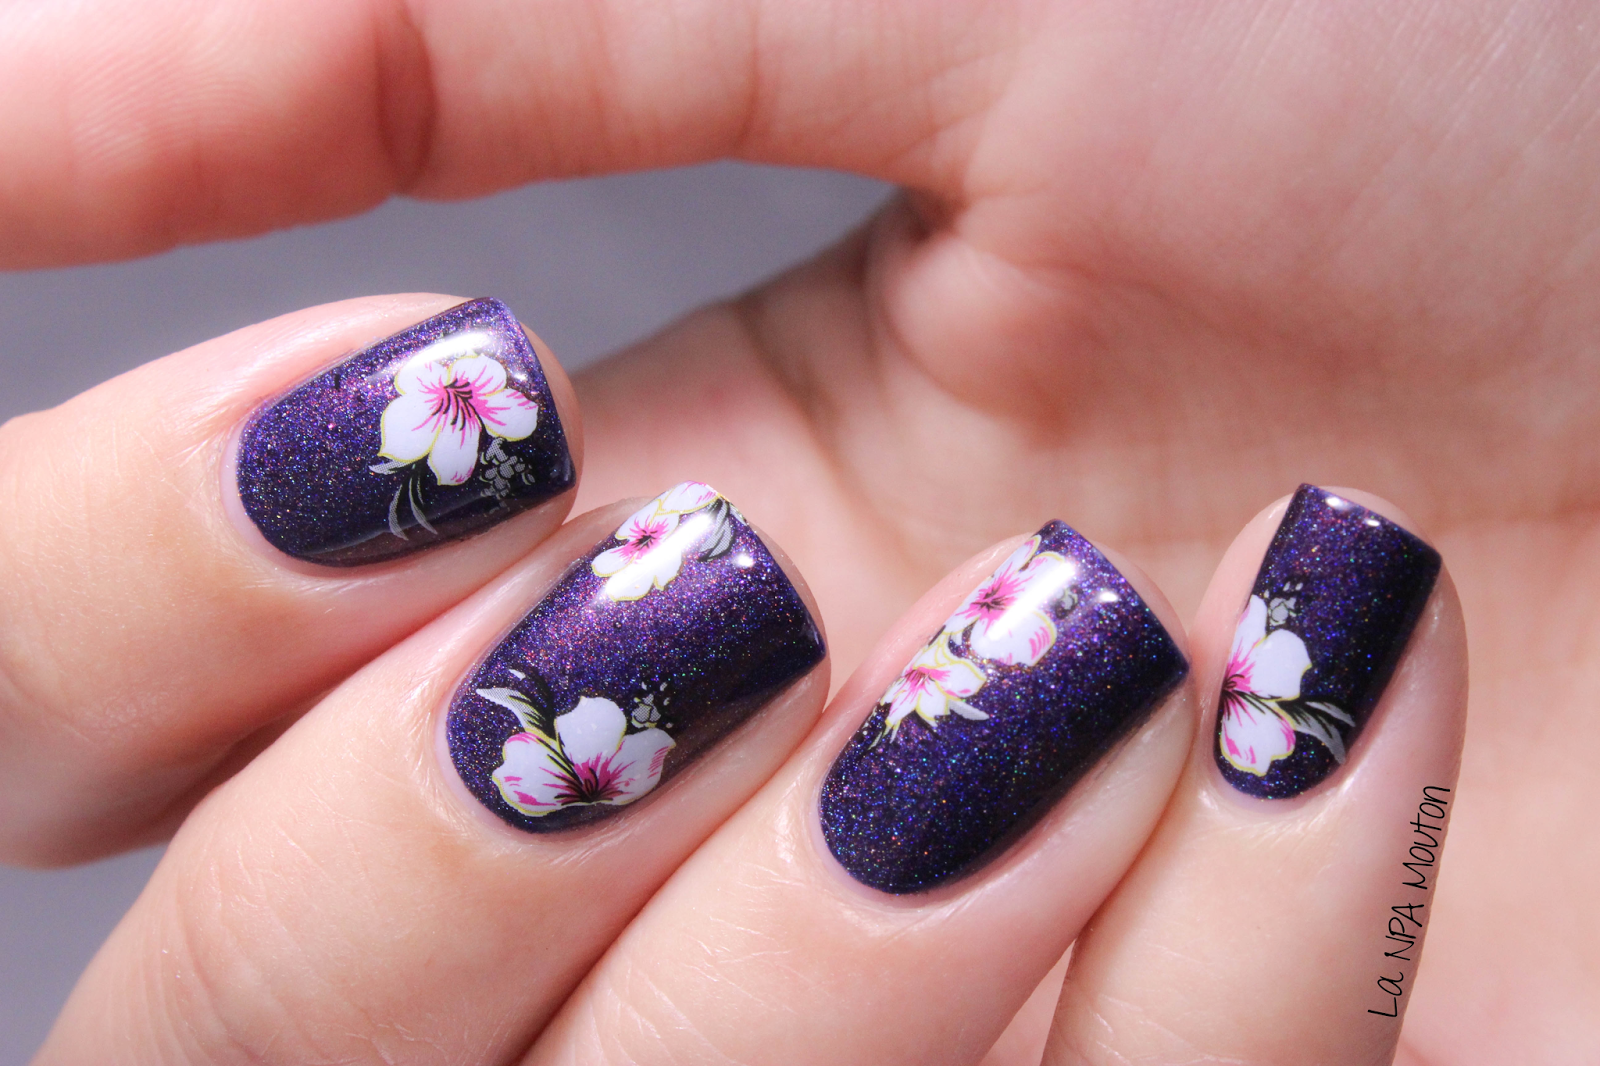 3. Nail Art Images - wide 4